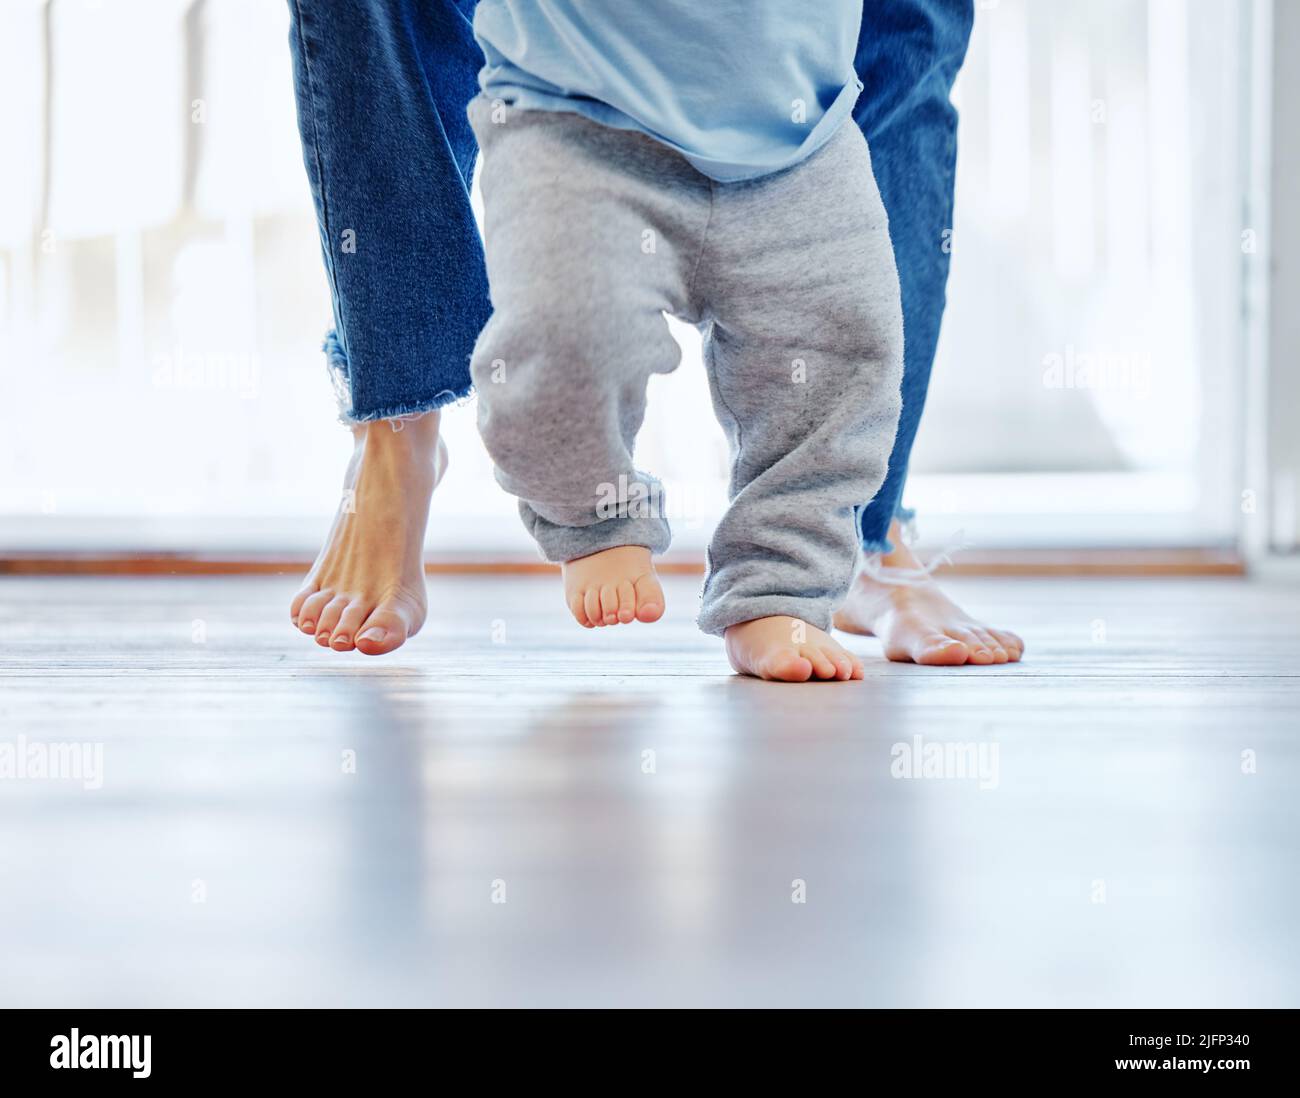 Soon hell be walking on his own. Cropped shot of an unrecognizable little boy learning to walk with the help of his mother at home. Stock Photo